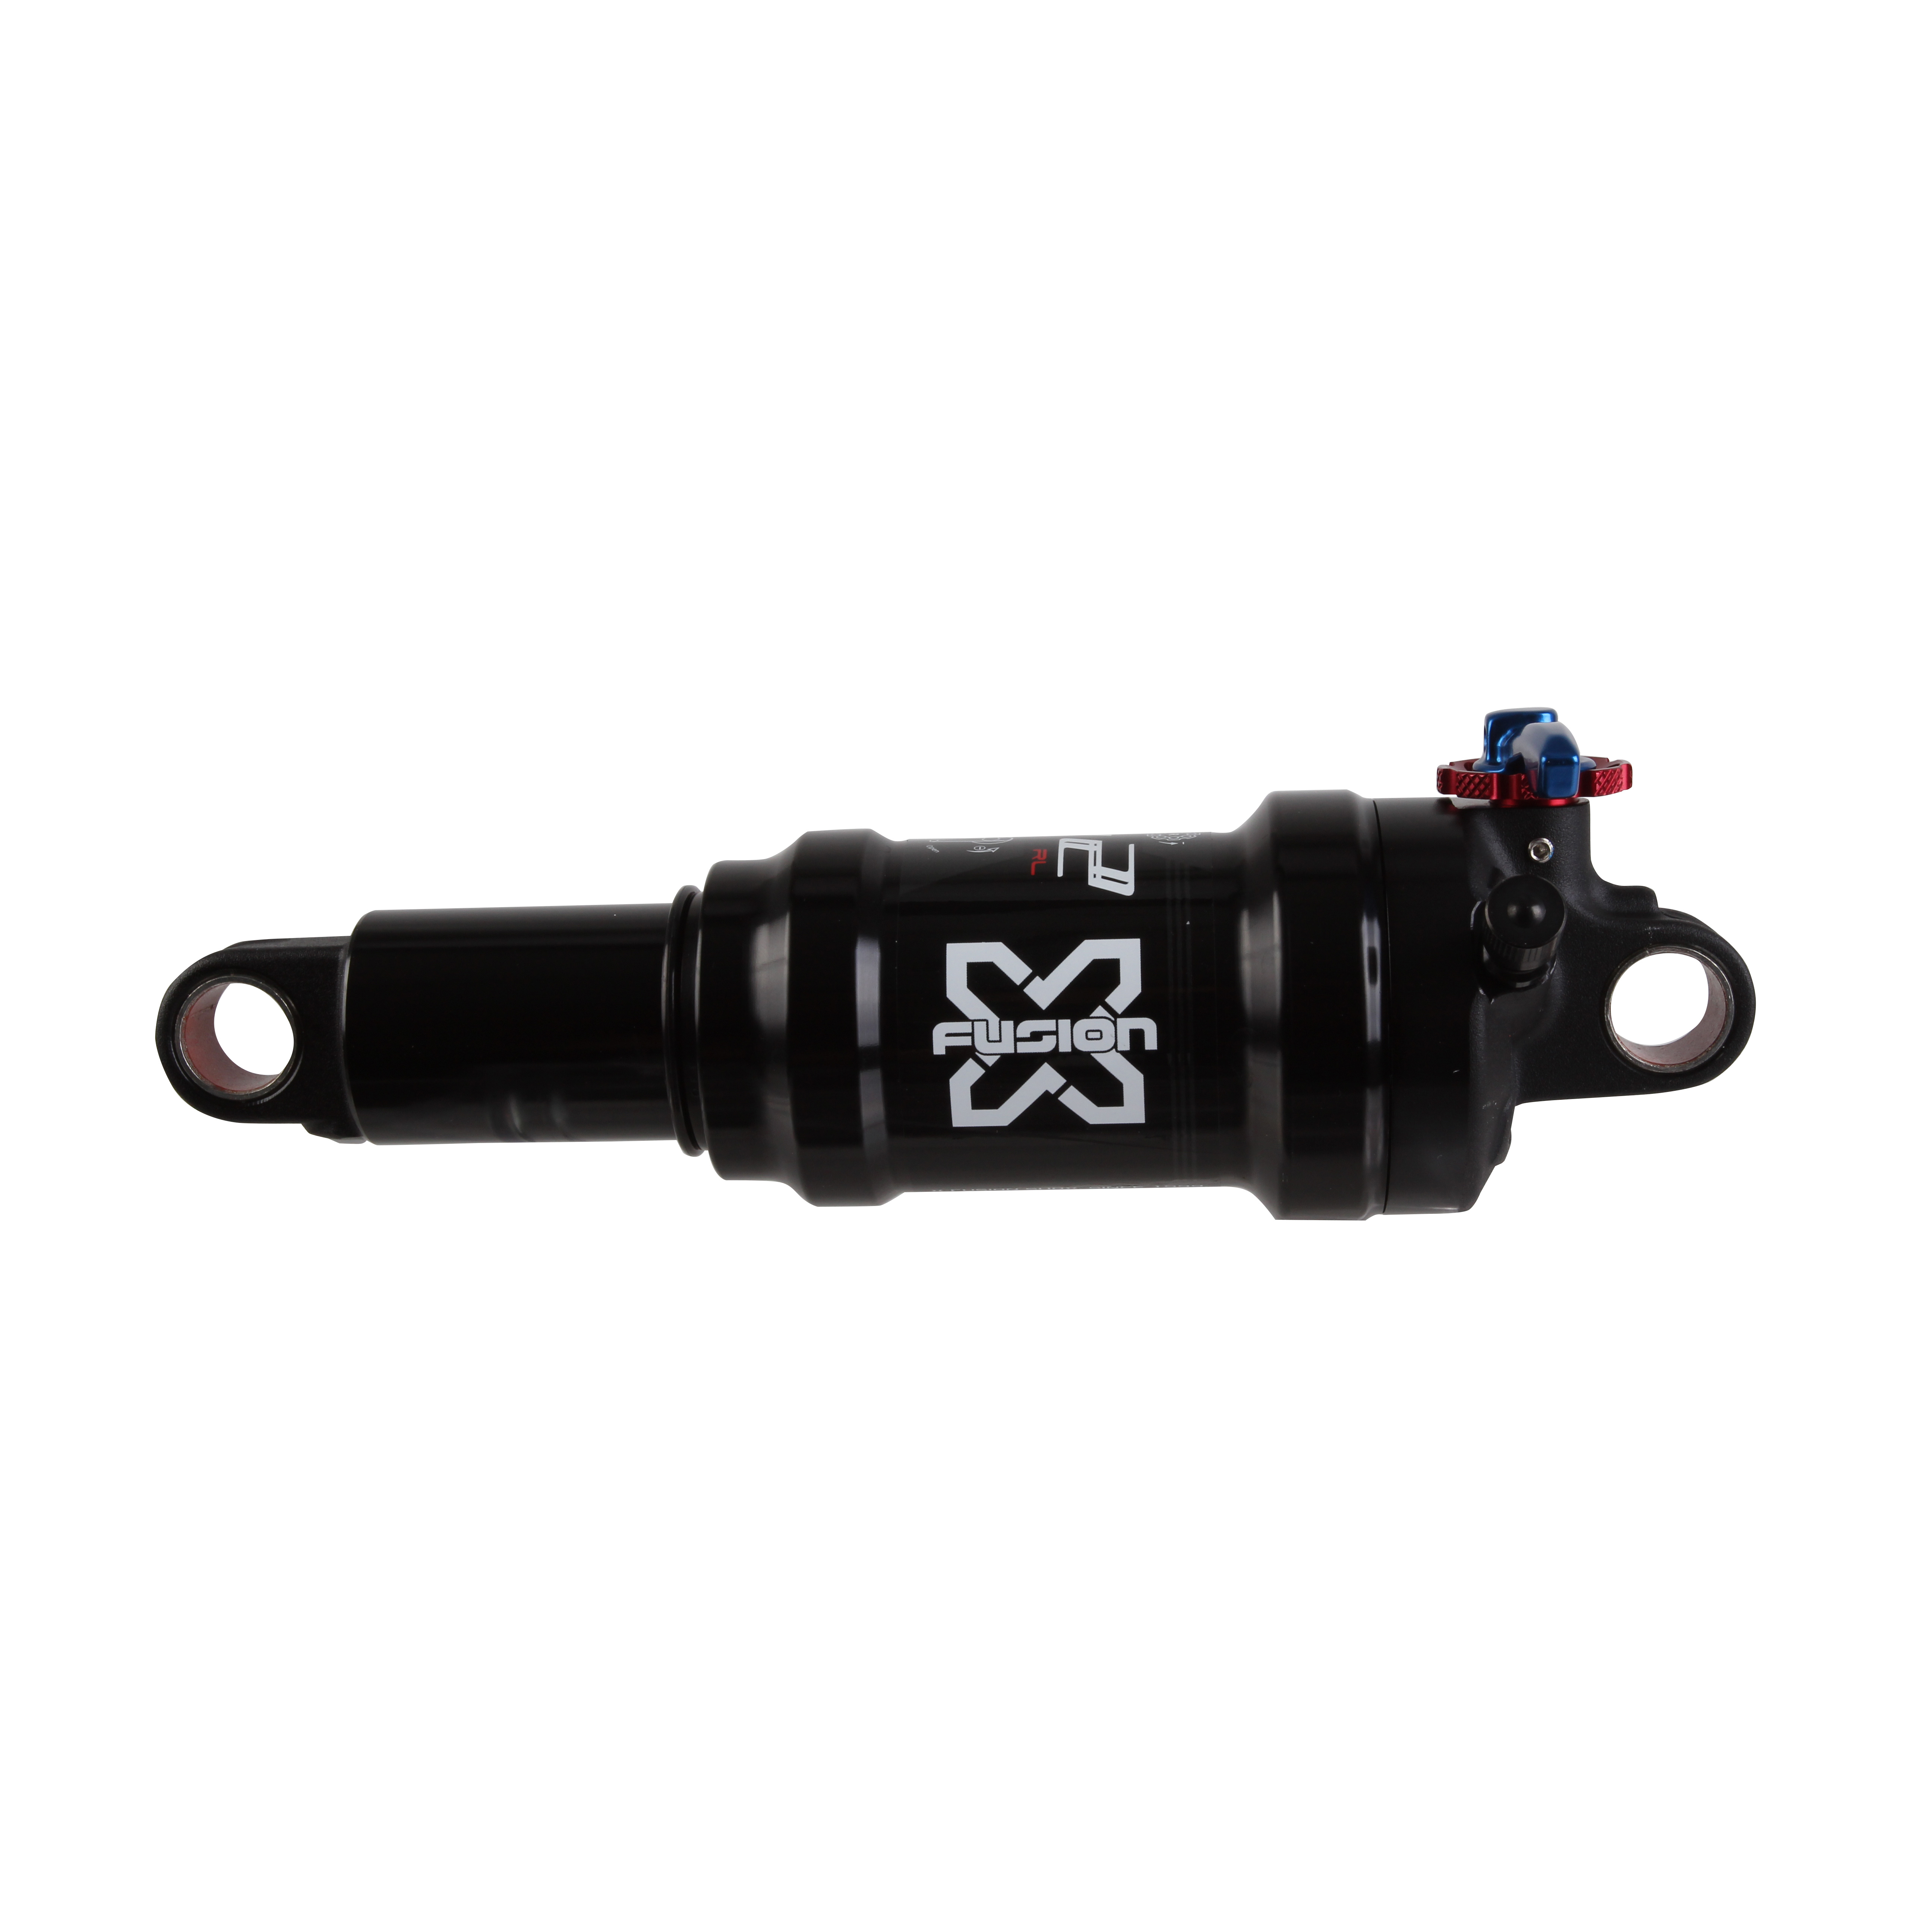 X Fusion O2 RL Bicycle frame shock absorber device 